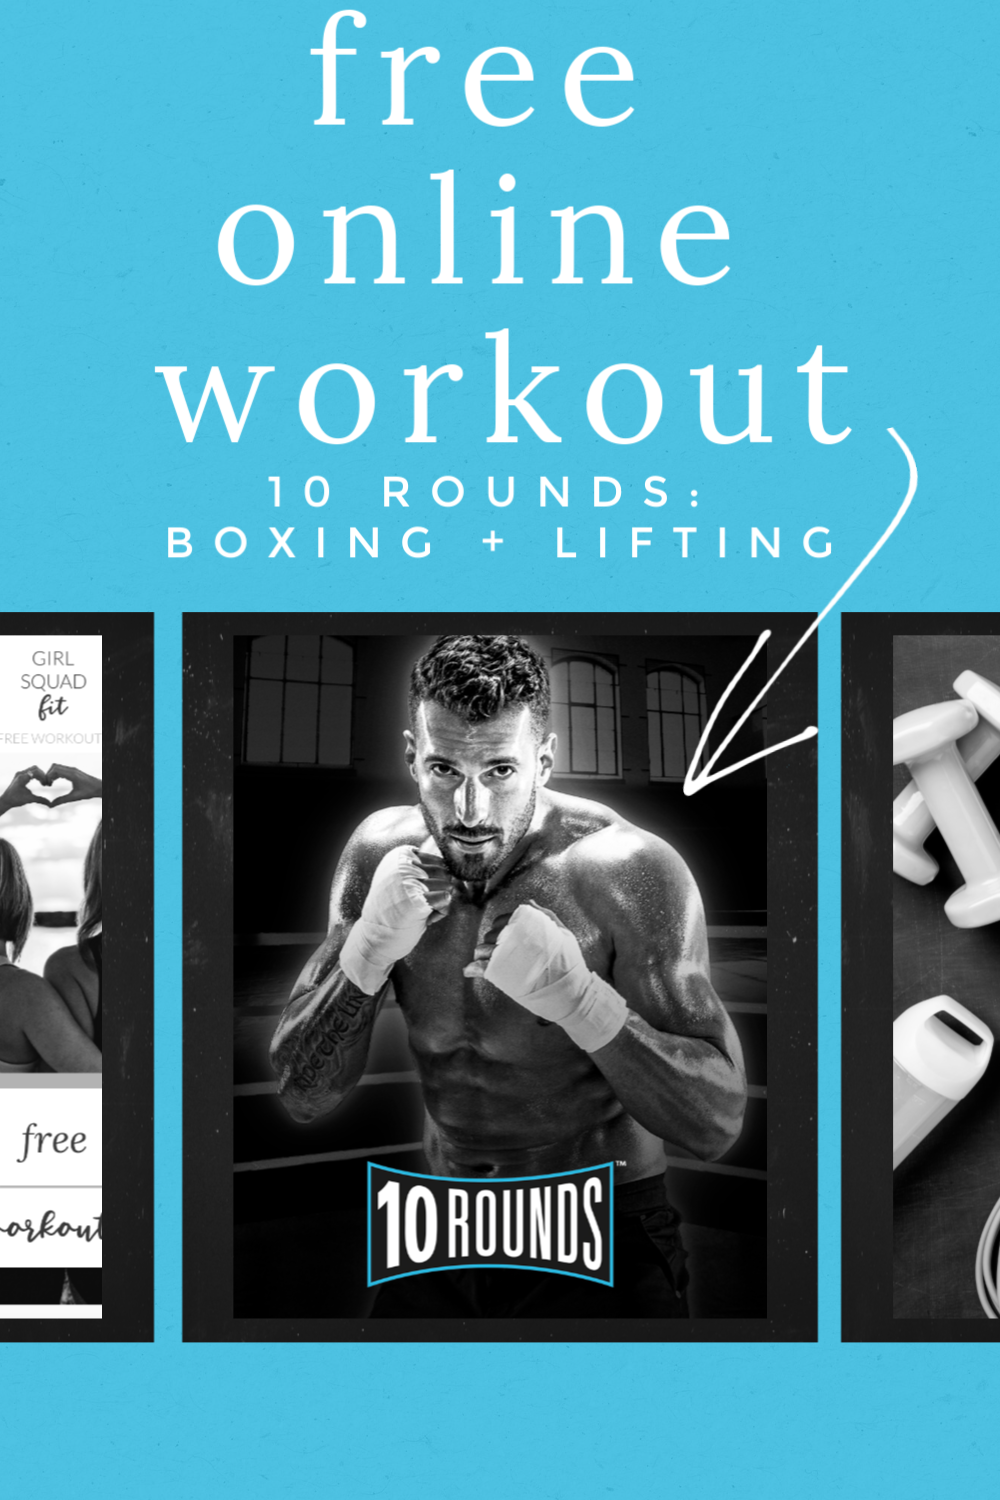 10 Rounds A Boxing And Lifting Online Home Workout Program — Girl Squad Fit